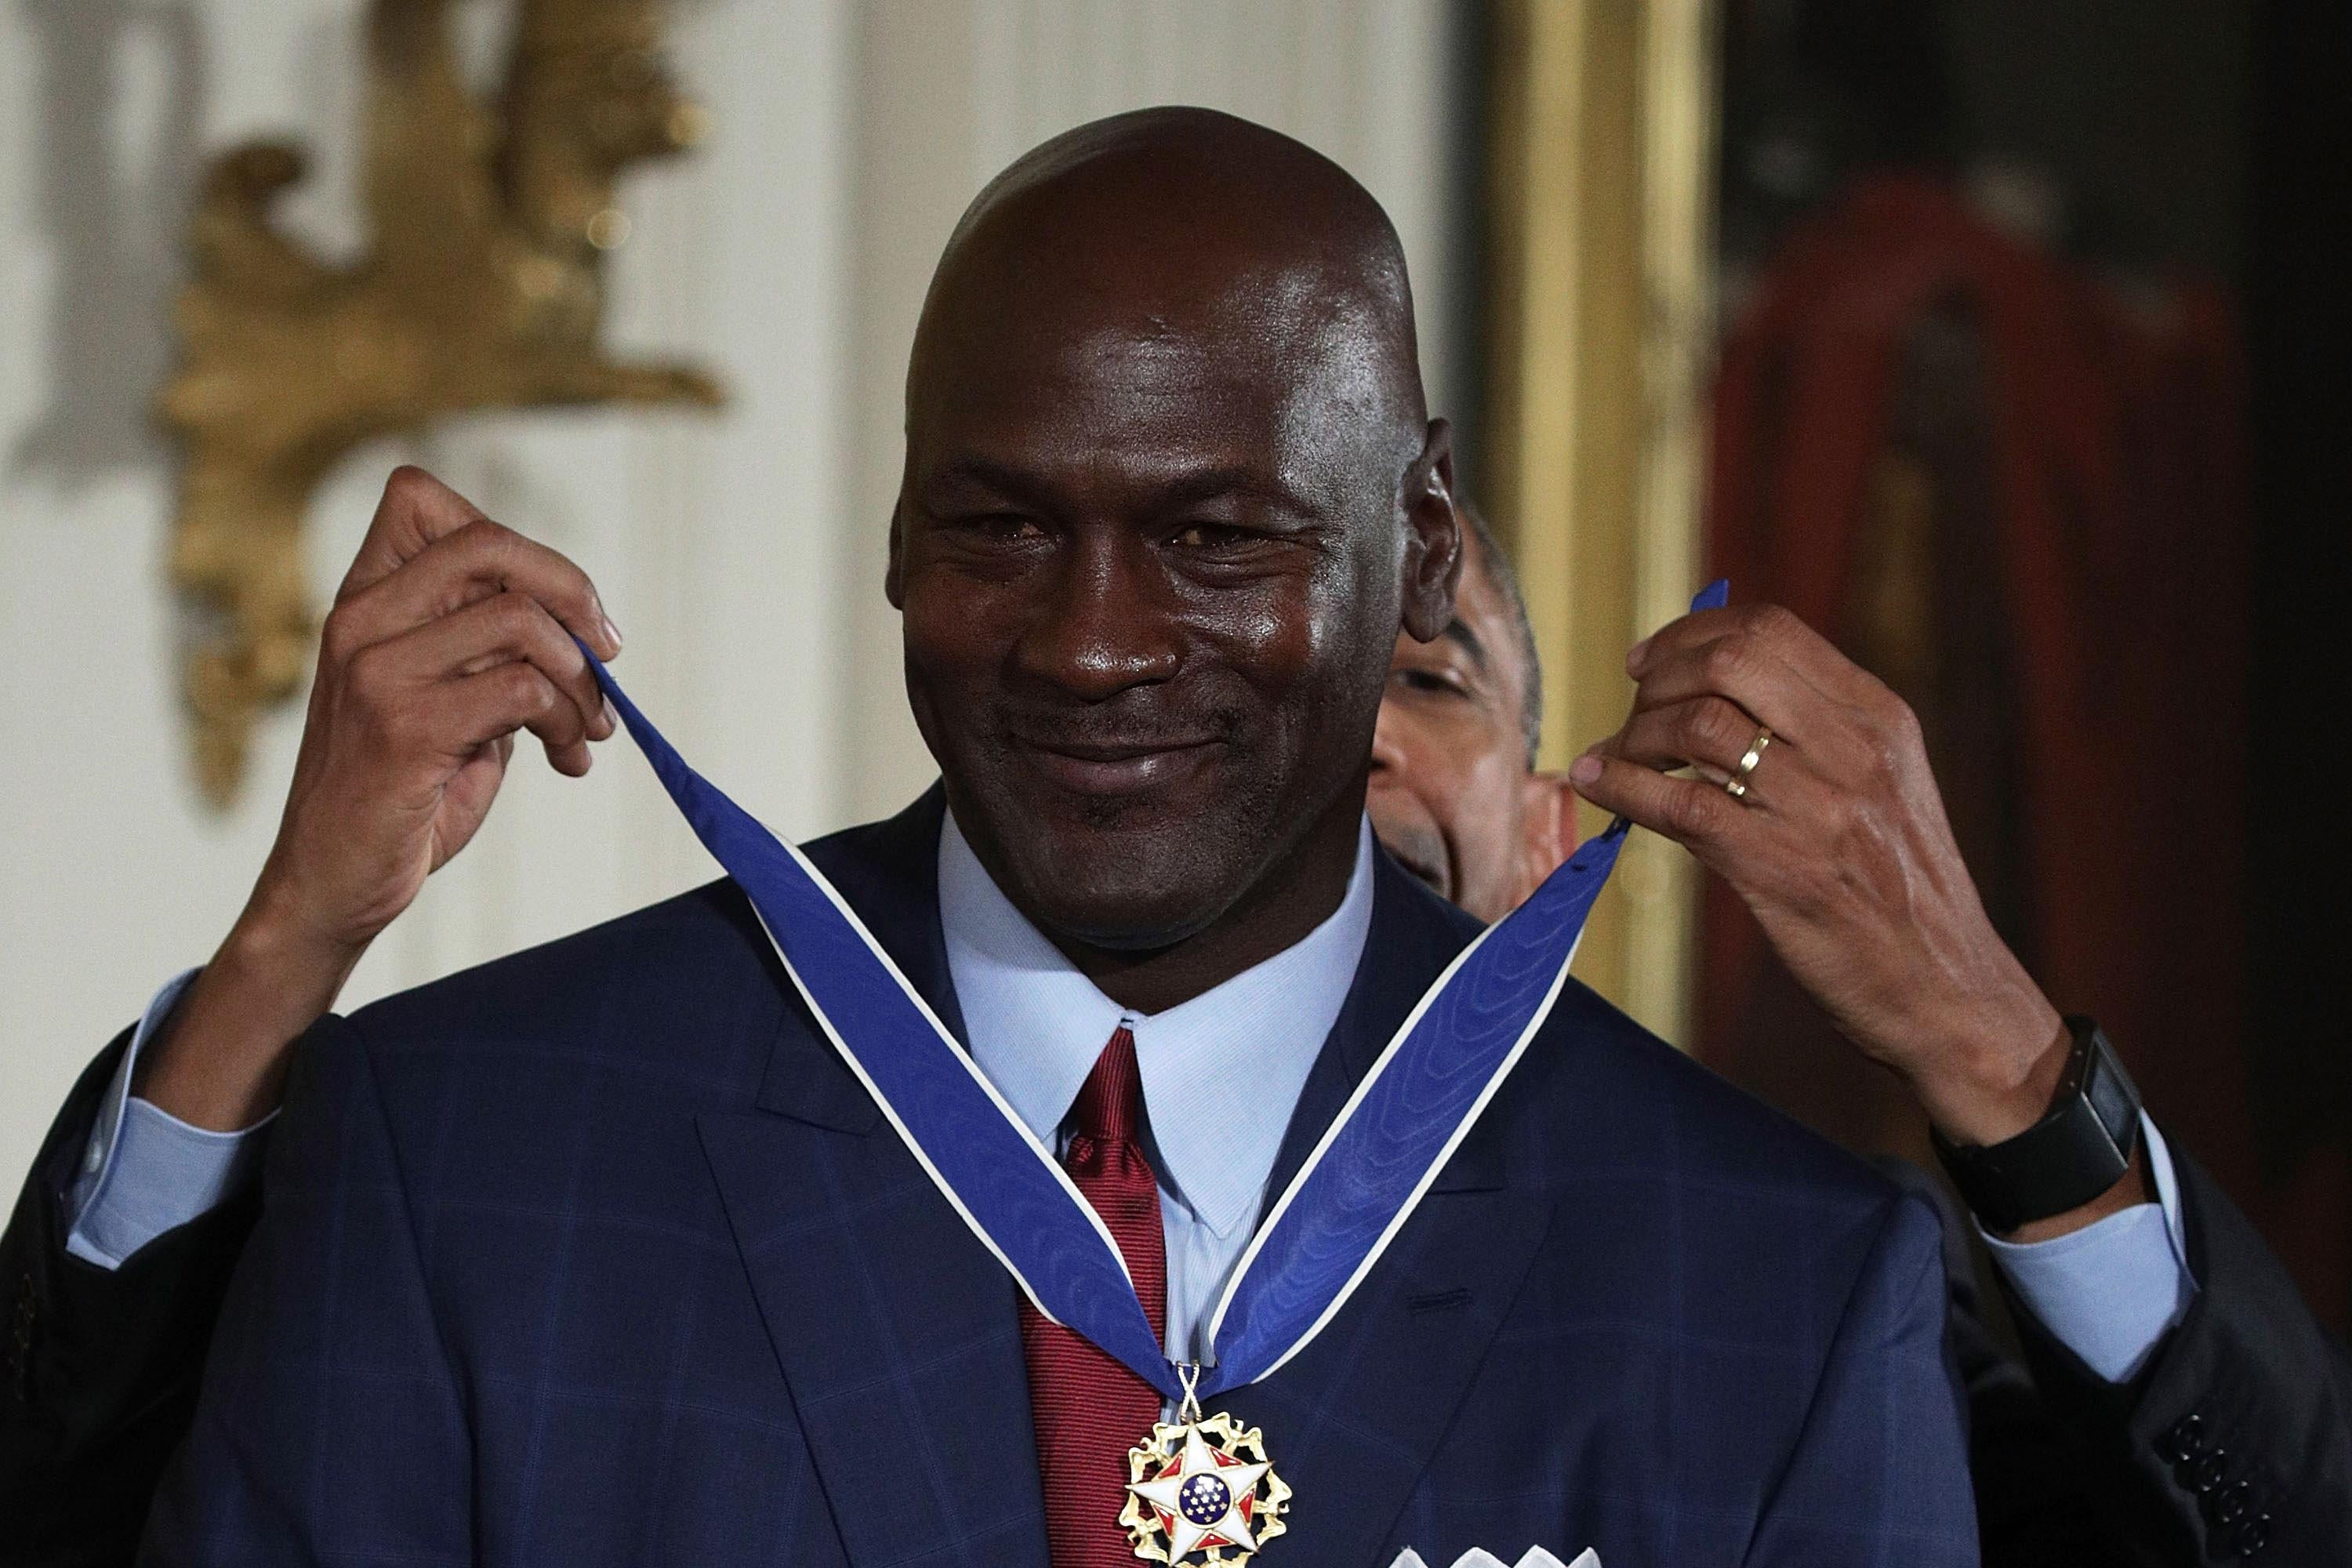 WASHINGTON, DC - NOVEMBER 22:  U.S. U.S. President Barack Obama presents the Presidential Medal of Freedom to former NBA star Michael Jordan during an East Room ceremony at the White House November 22, 2016 in Washington, DC. The Presidential Medal of Freedom is the highest honor for civilians in the United States of America.  (Photo by Alex Wong/Getty Images)